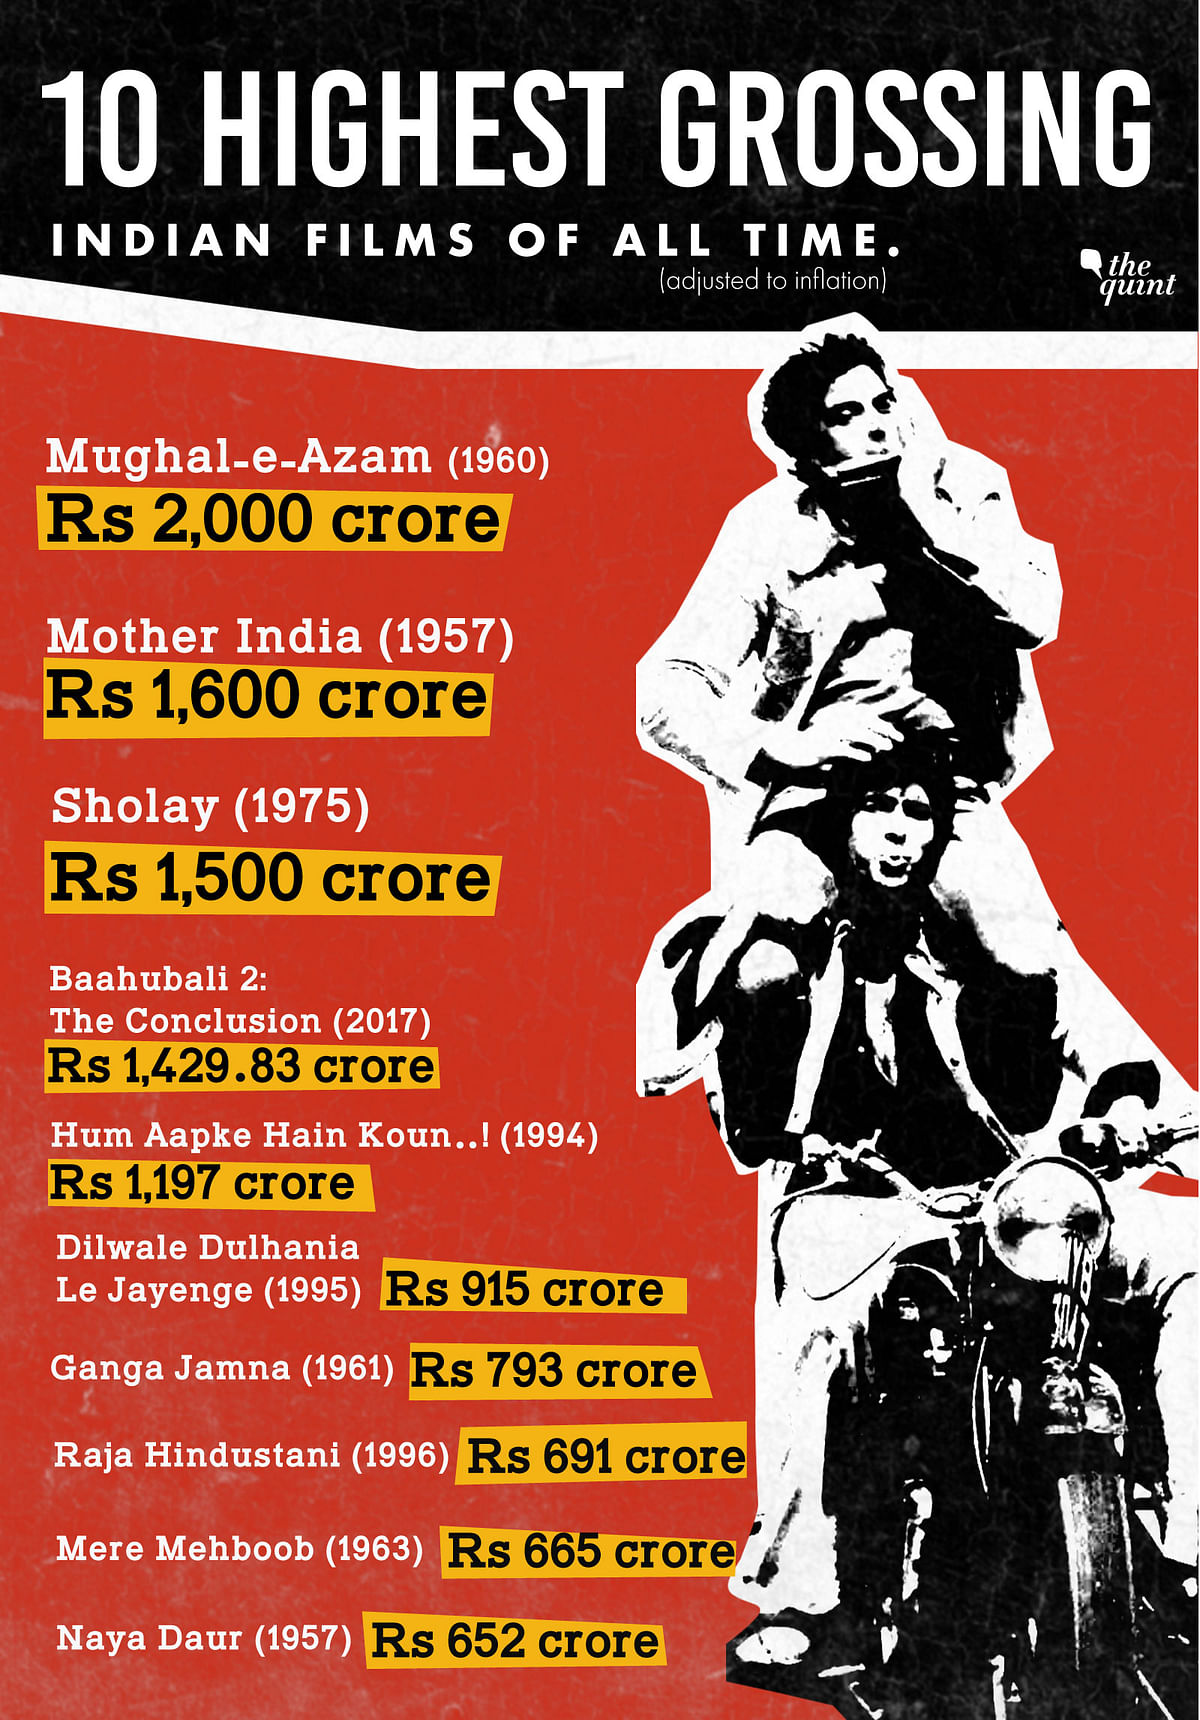 When adjusted against inflation several old Hindi films make it to the top 10.